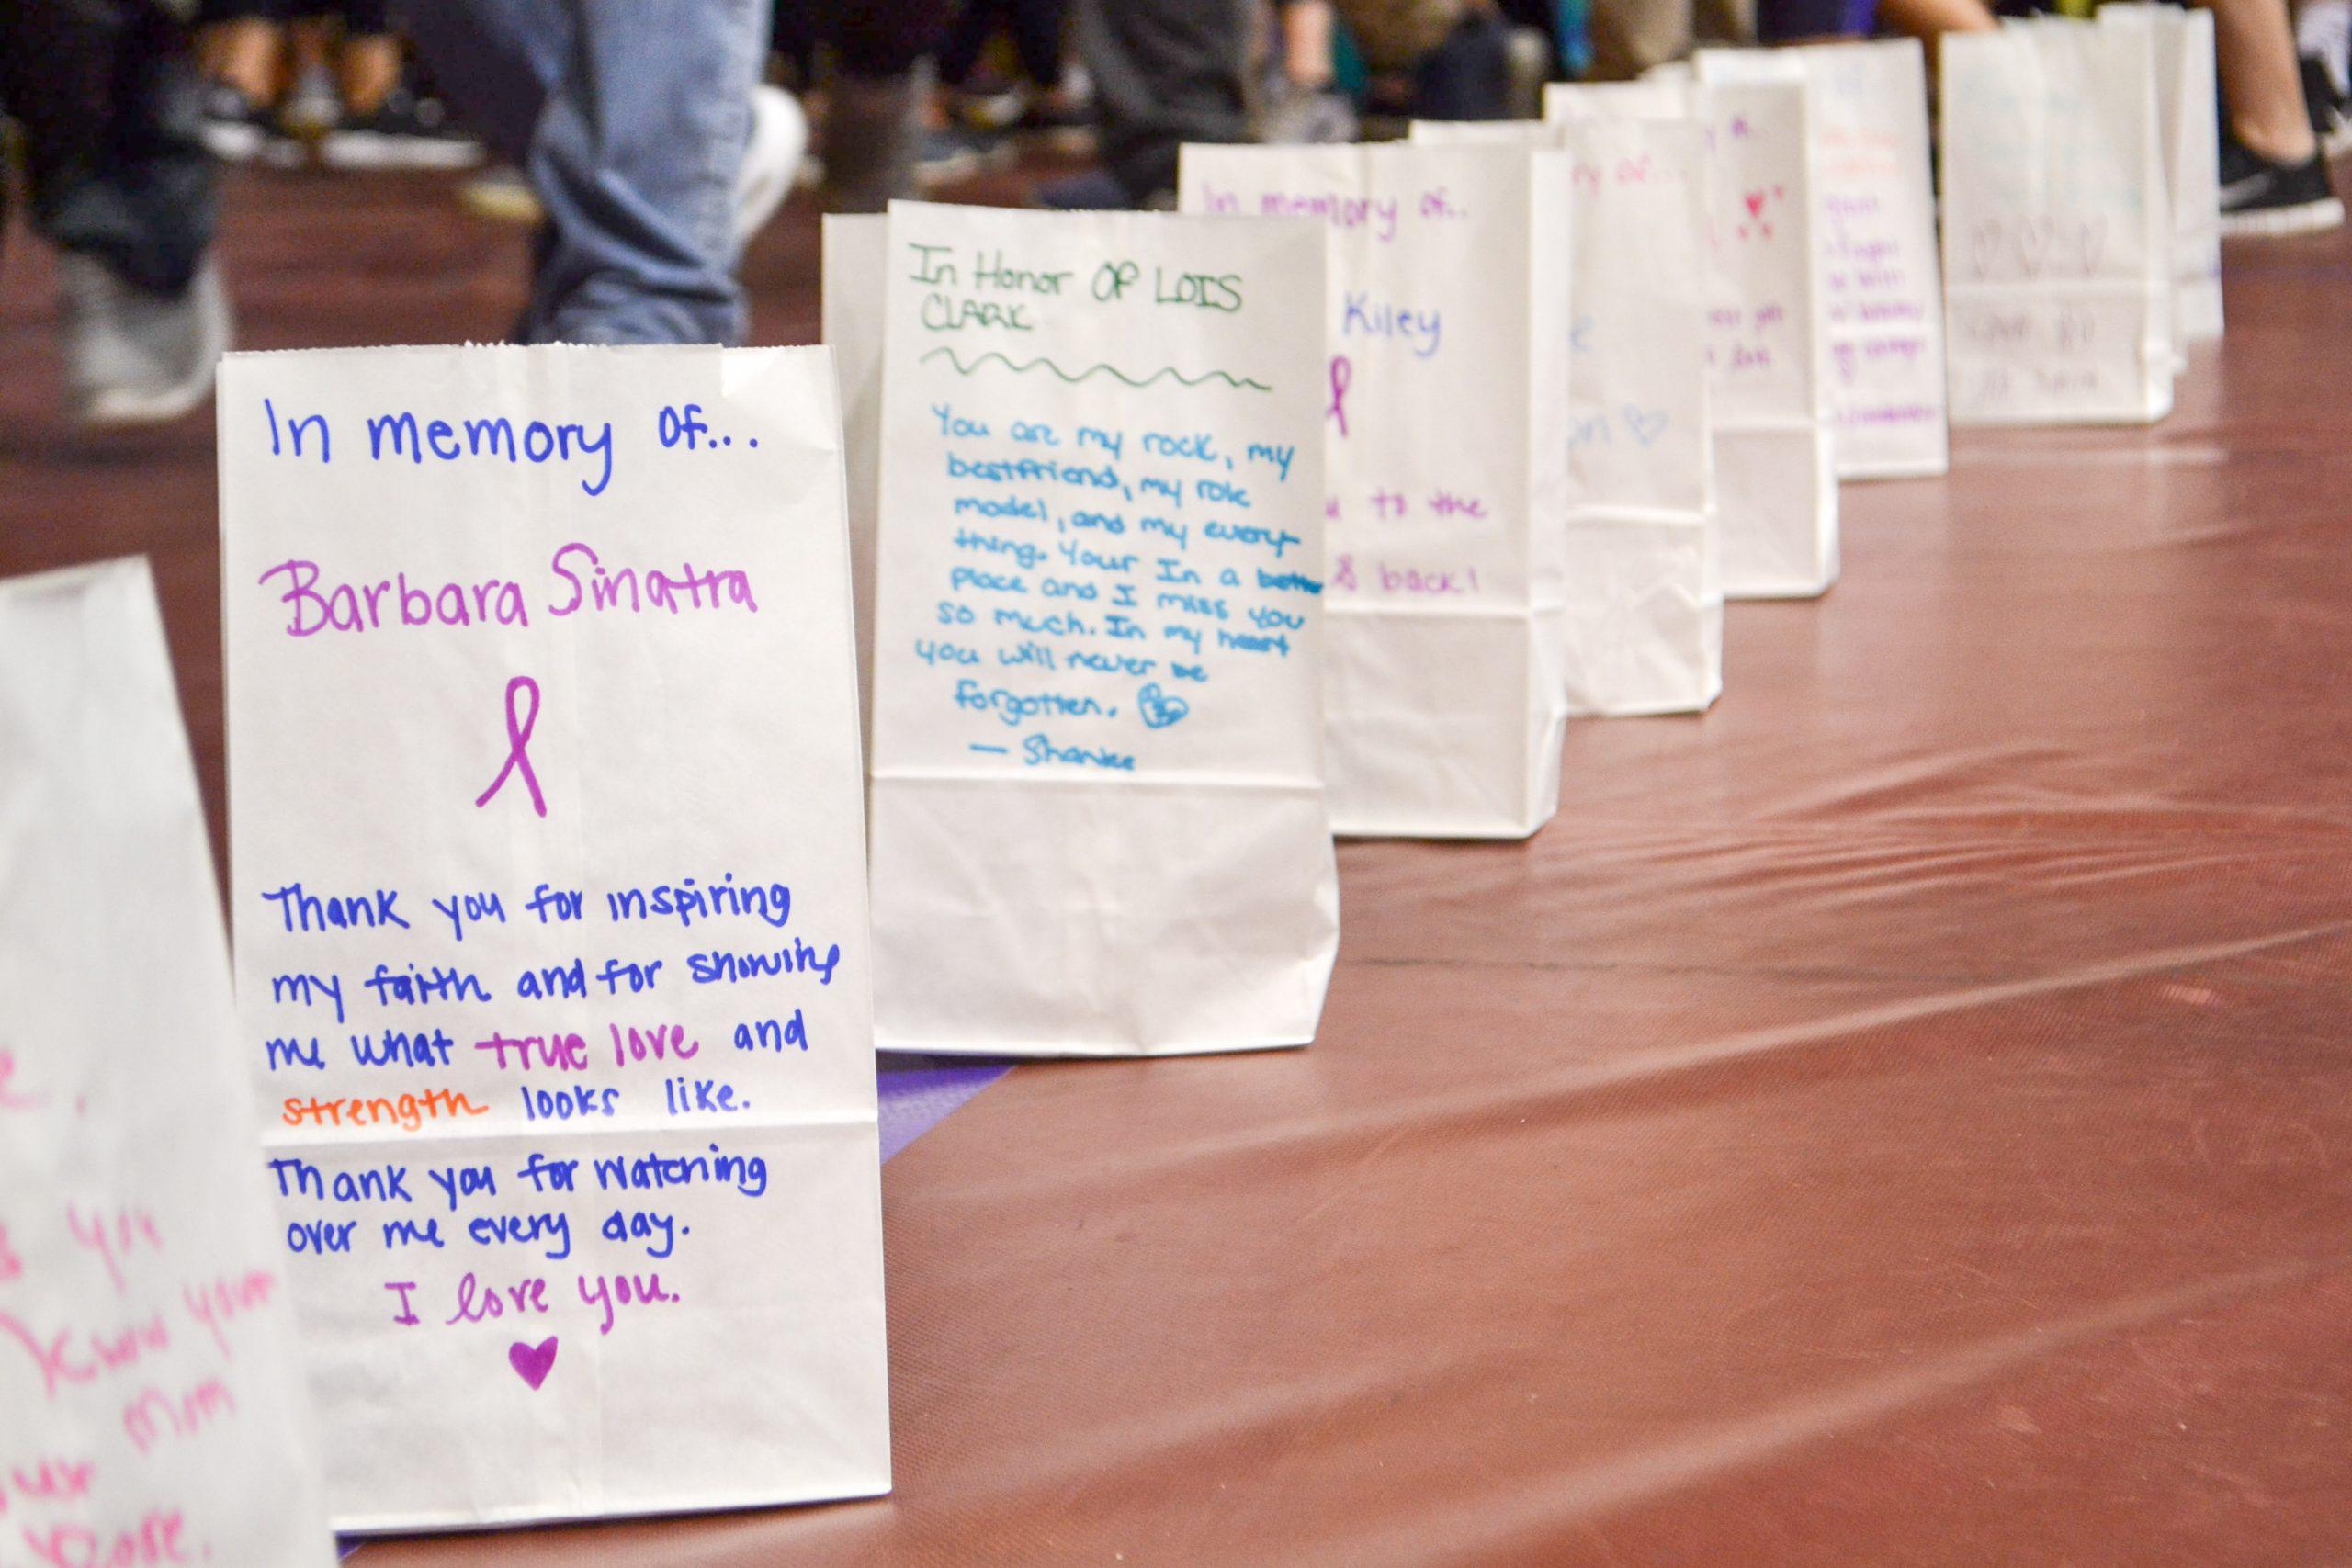 Luminaria bags line the Michael J. Hagan Arena floor to commerate those affected by cancer during the 2017 Relay for Life event. PHOTO: KRISTEN BABICH 20/THE HAWK